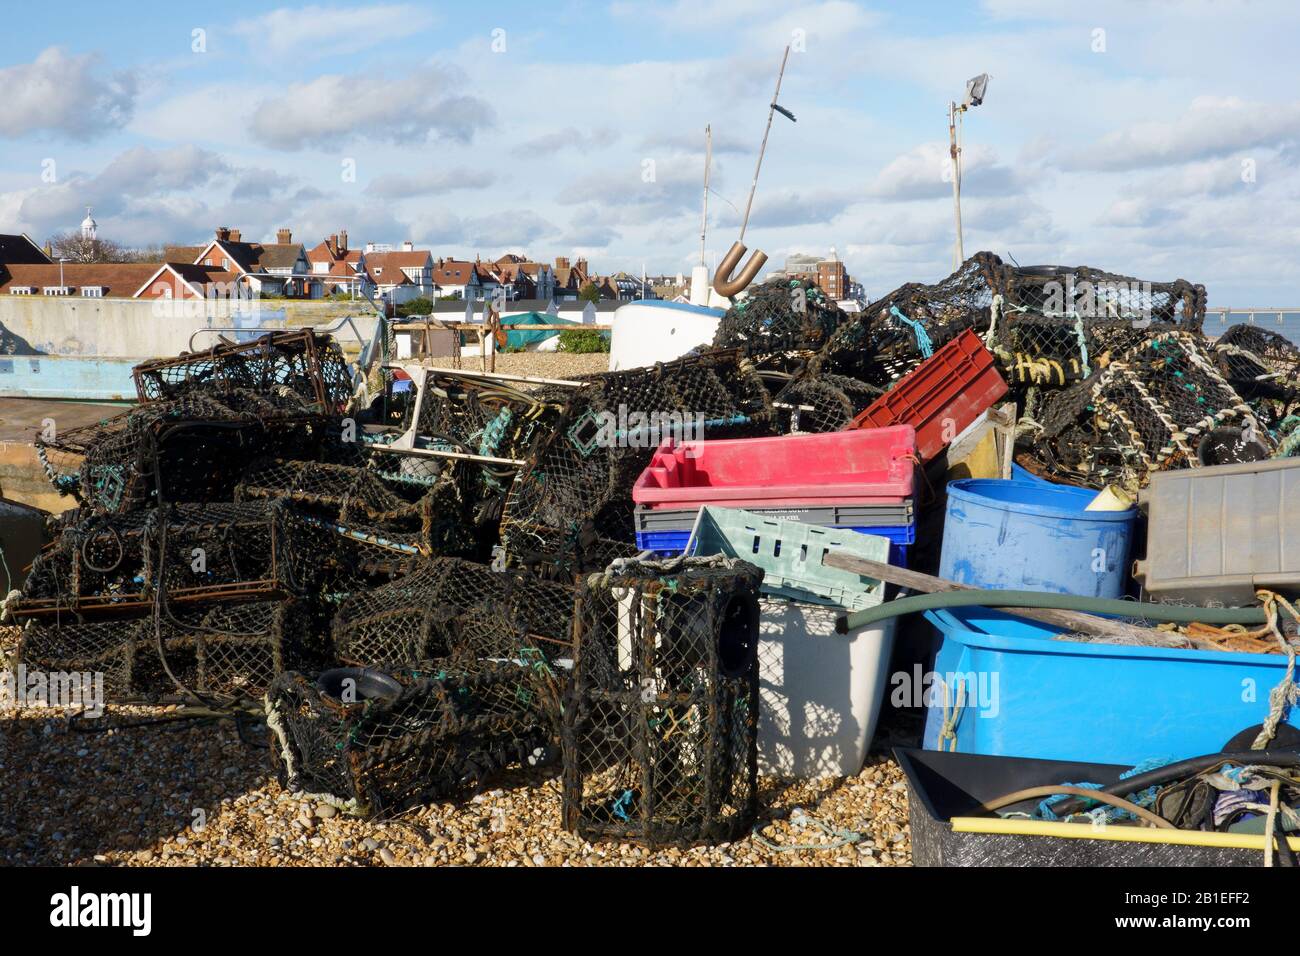 Deal Beach,Lobster pots,storage boxes,Fishing Equipment,Deal,Kent,England Stock Photo